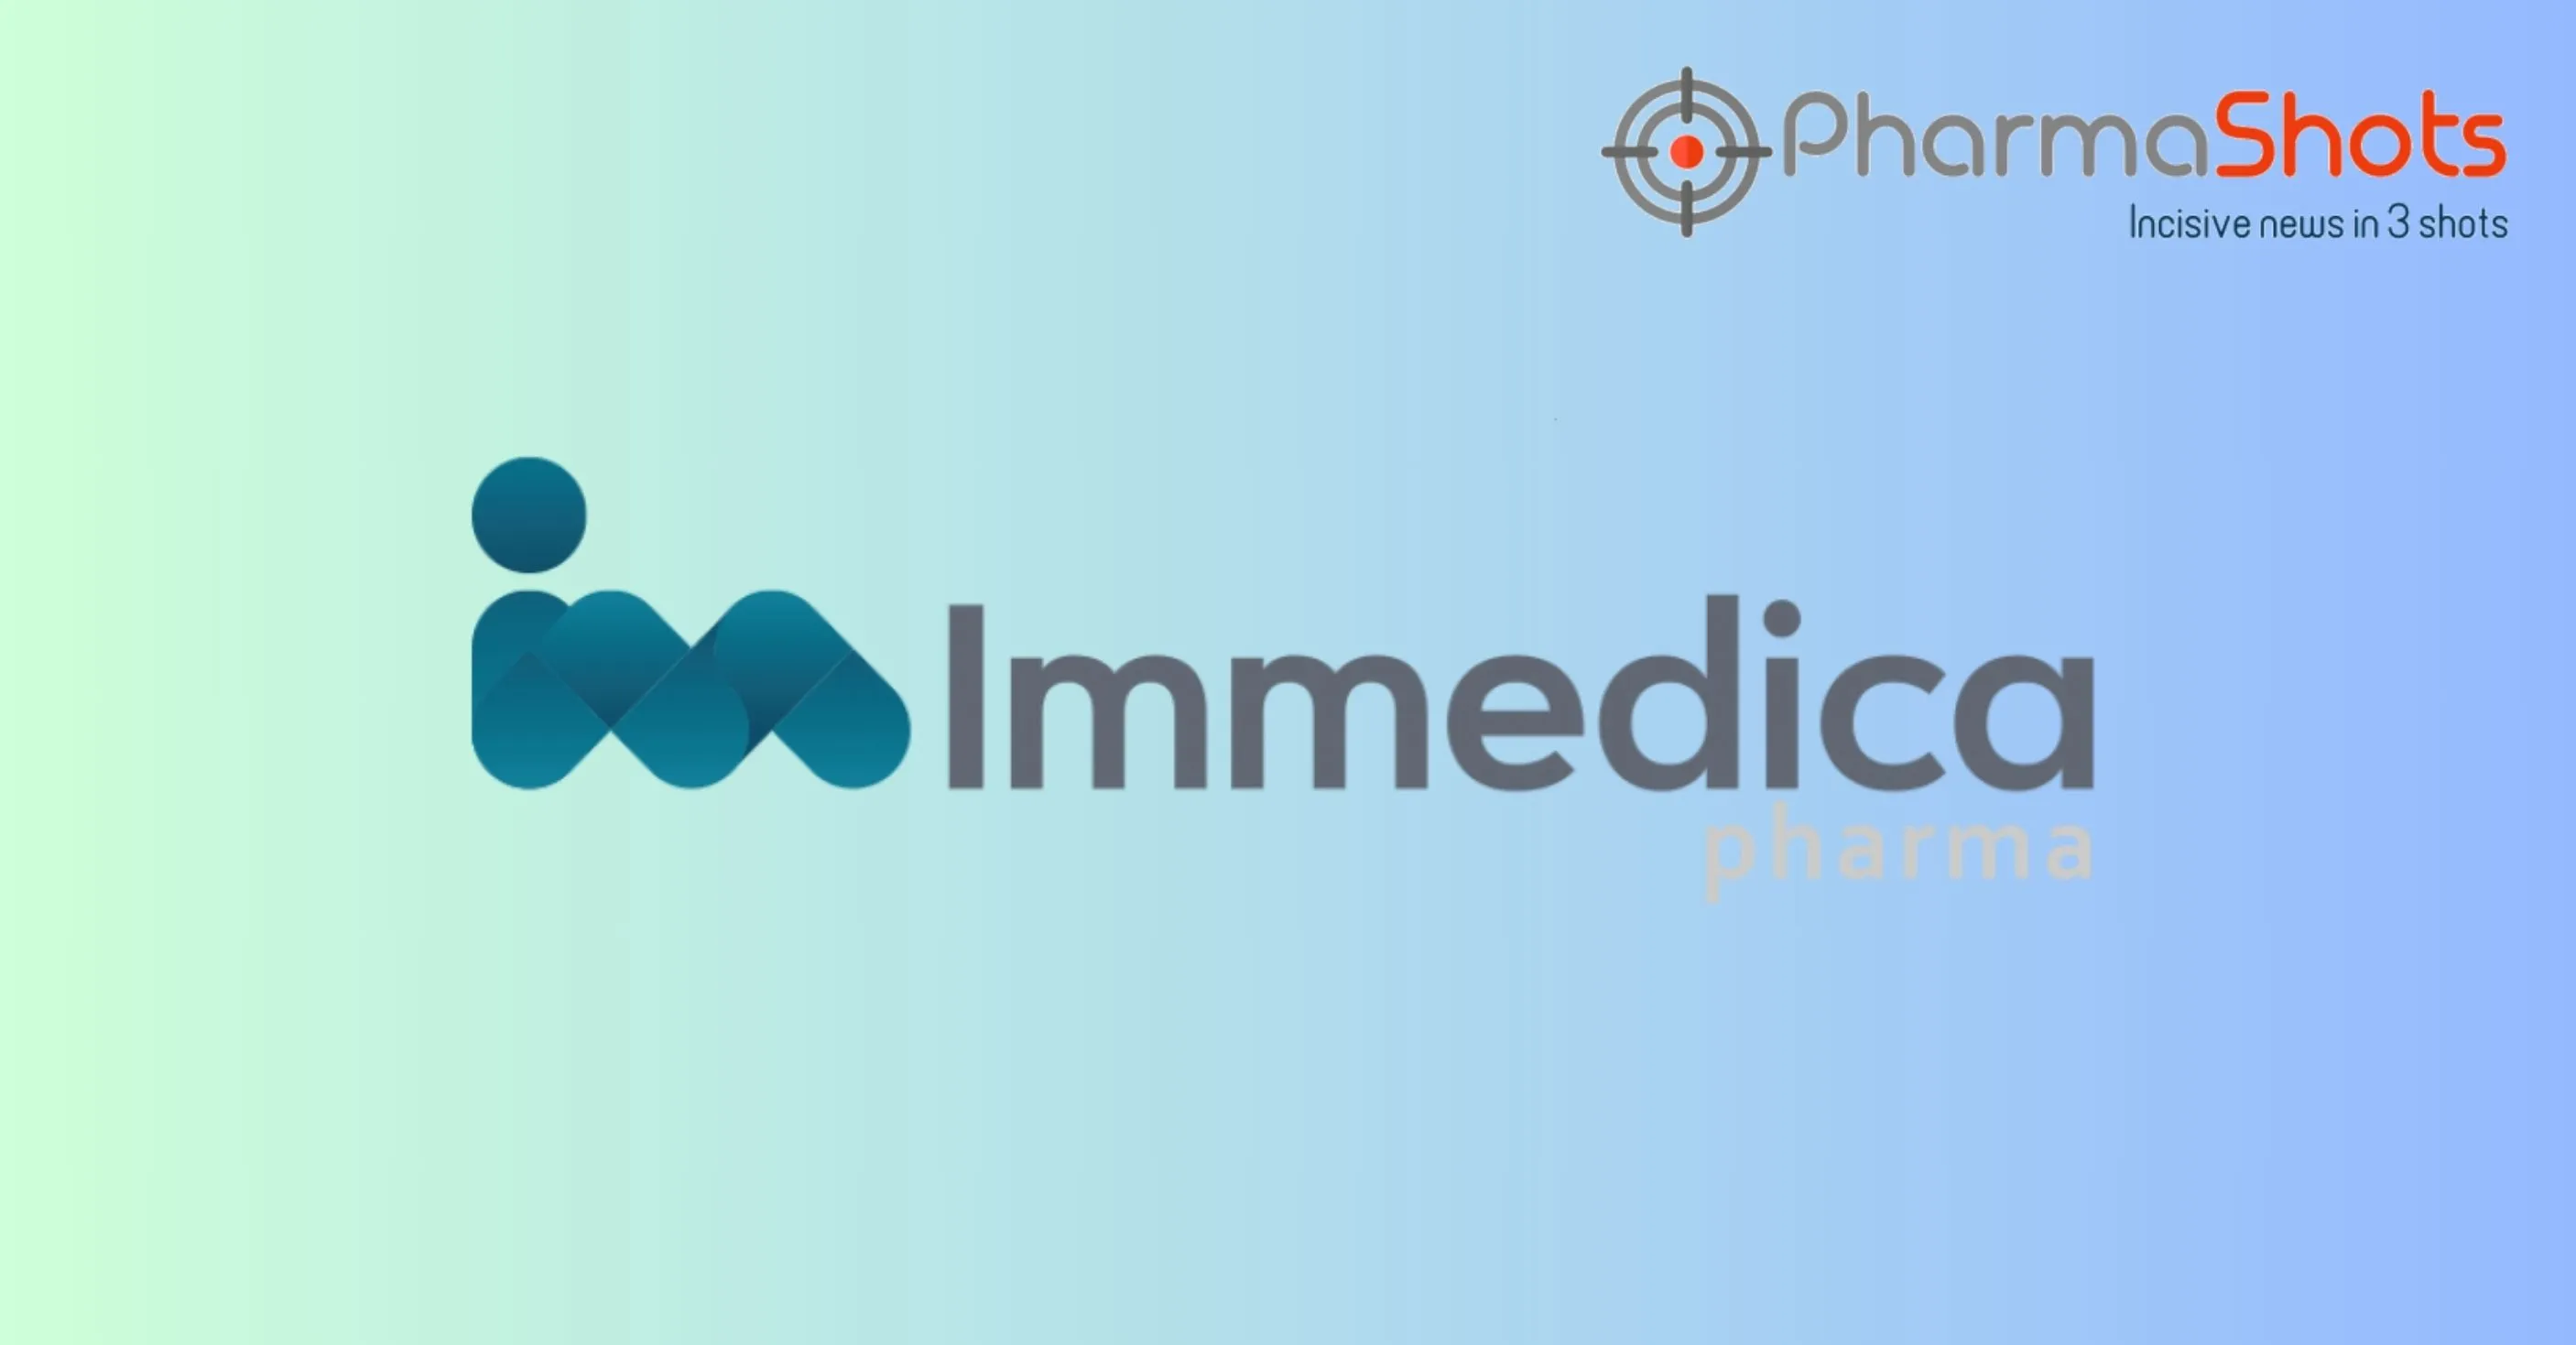 Immedica’s Loargys Received positive opinion from EU’s CHMP to treat arginase-1 deficiency (ARGI-D)